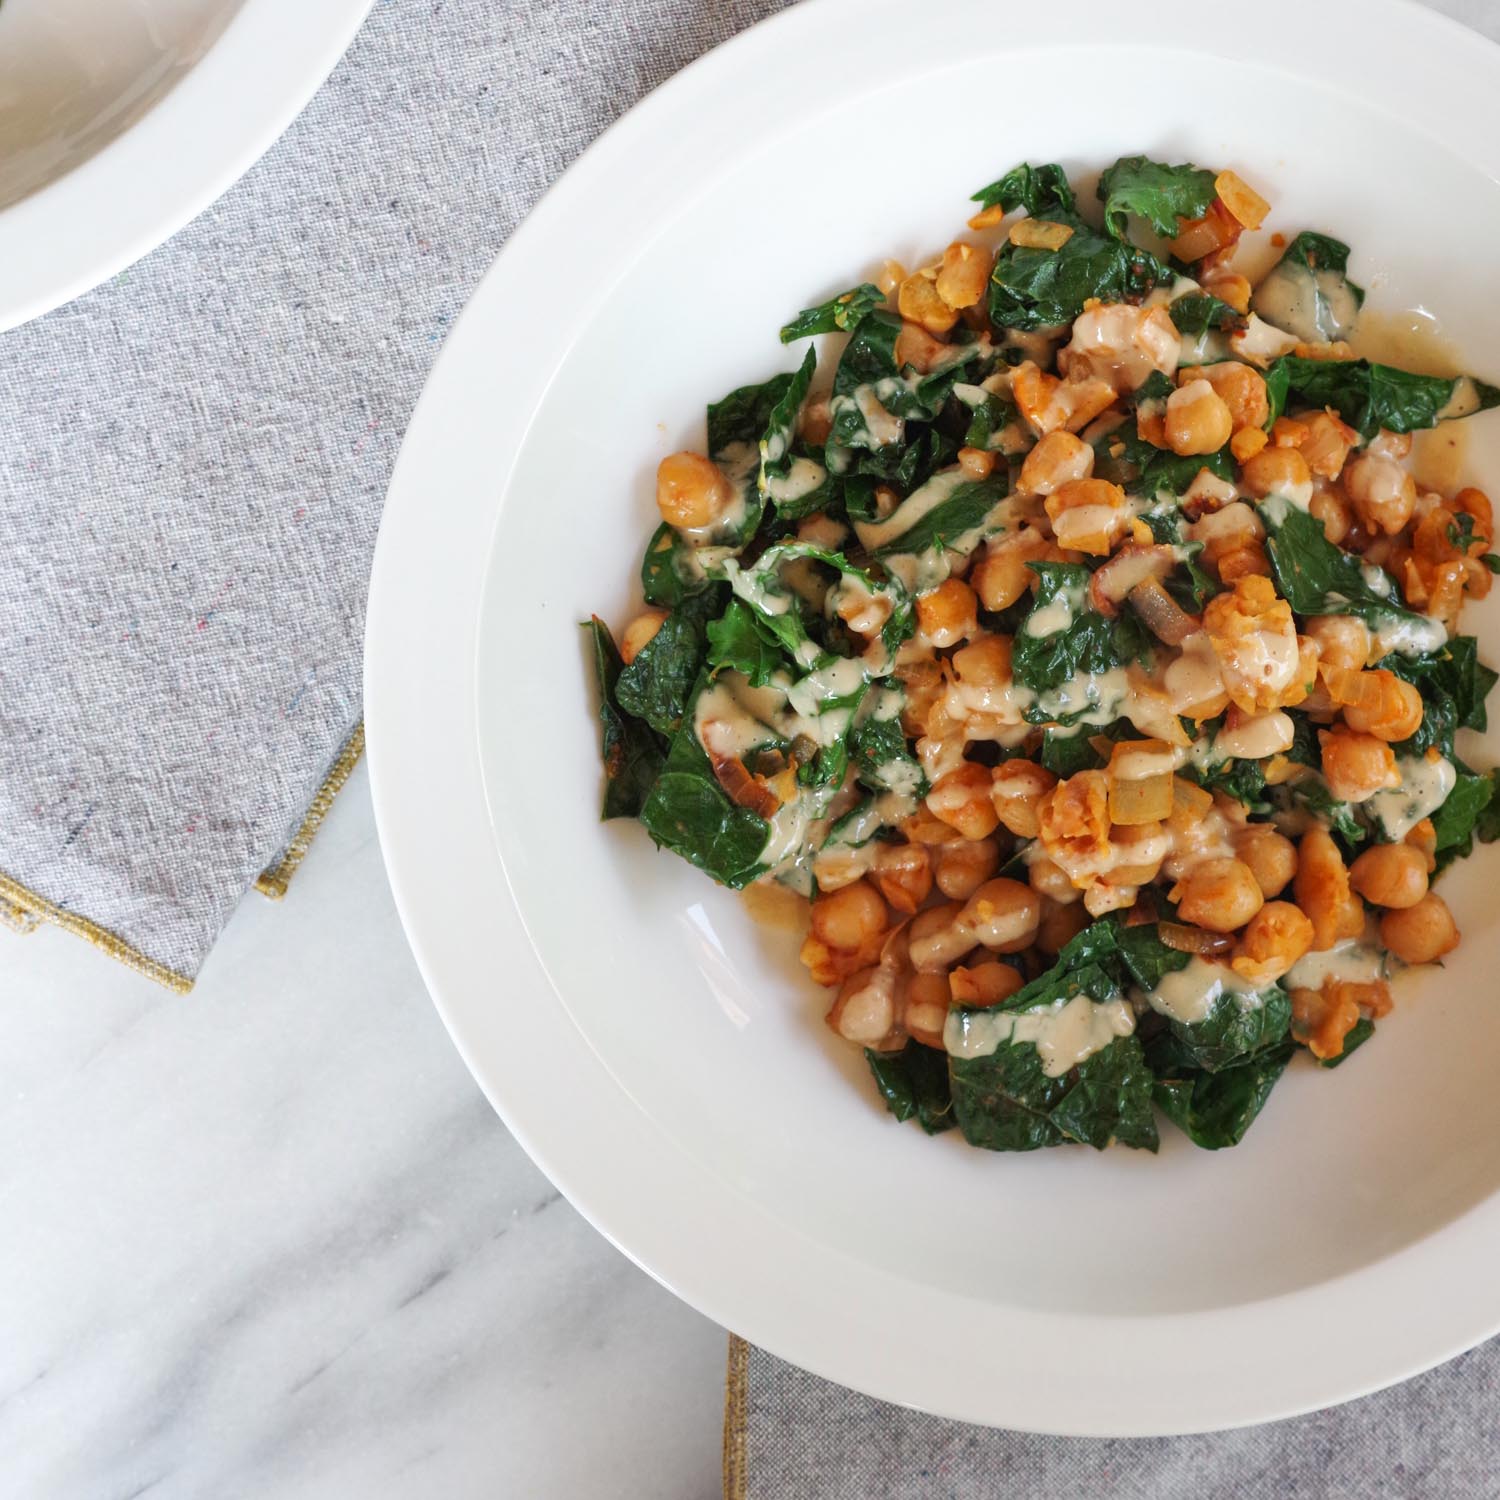 Smoky Kale and Chickpeas with Miso Peanut Drizzle From Bold Flavored Vegan Cooking